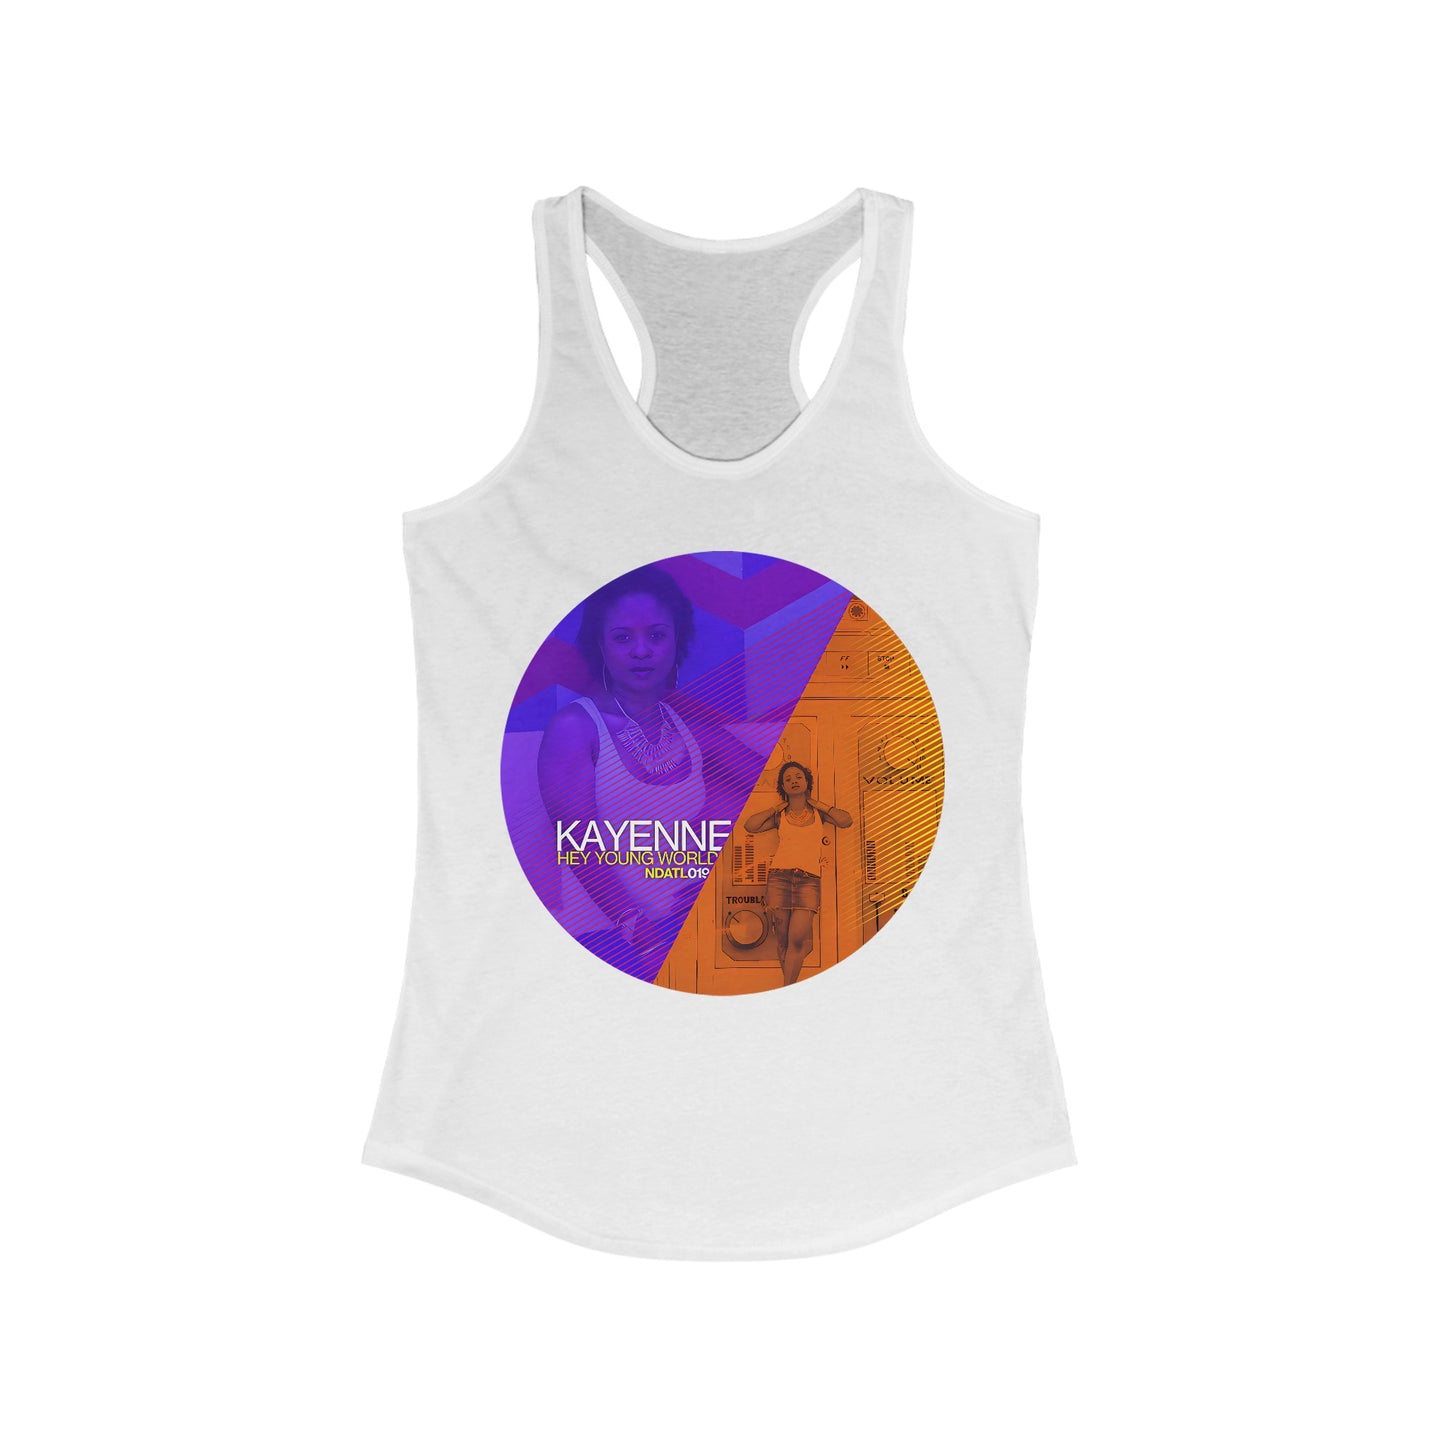 Hey Young World_Women's Ideal Racerback Tank